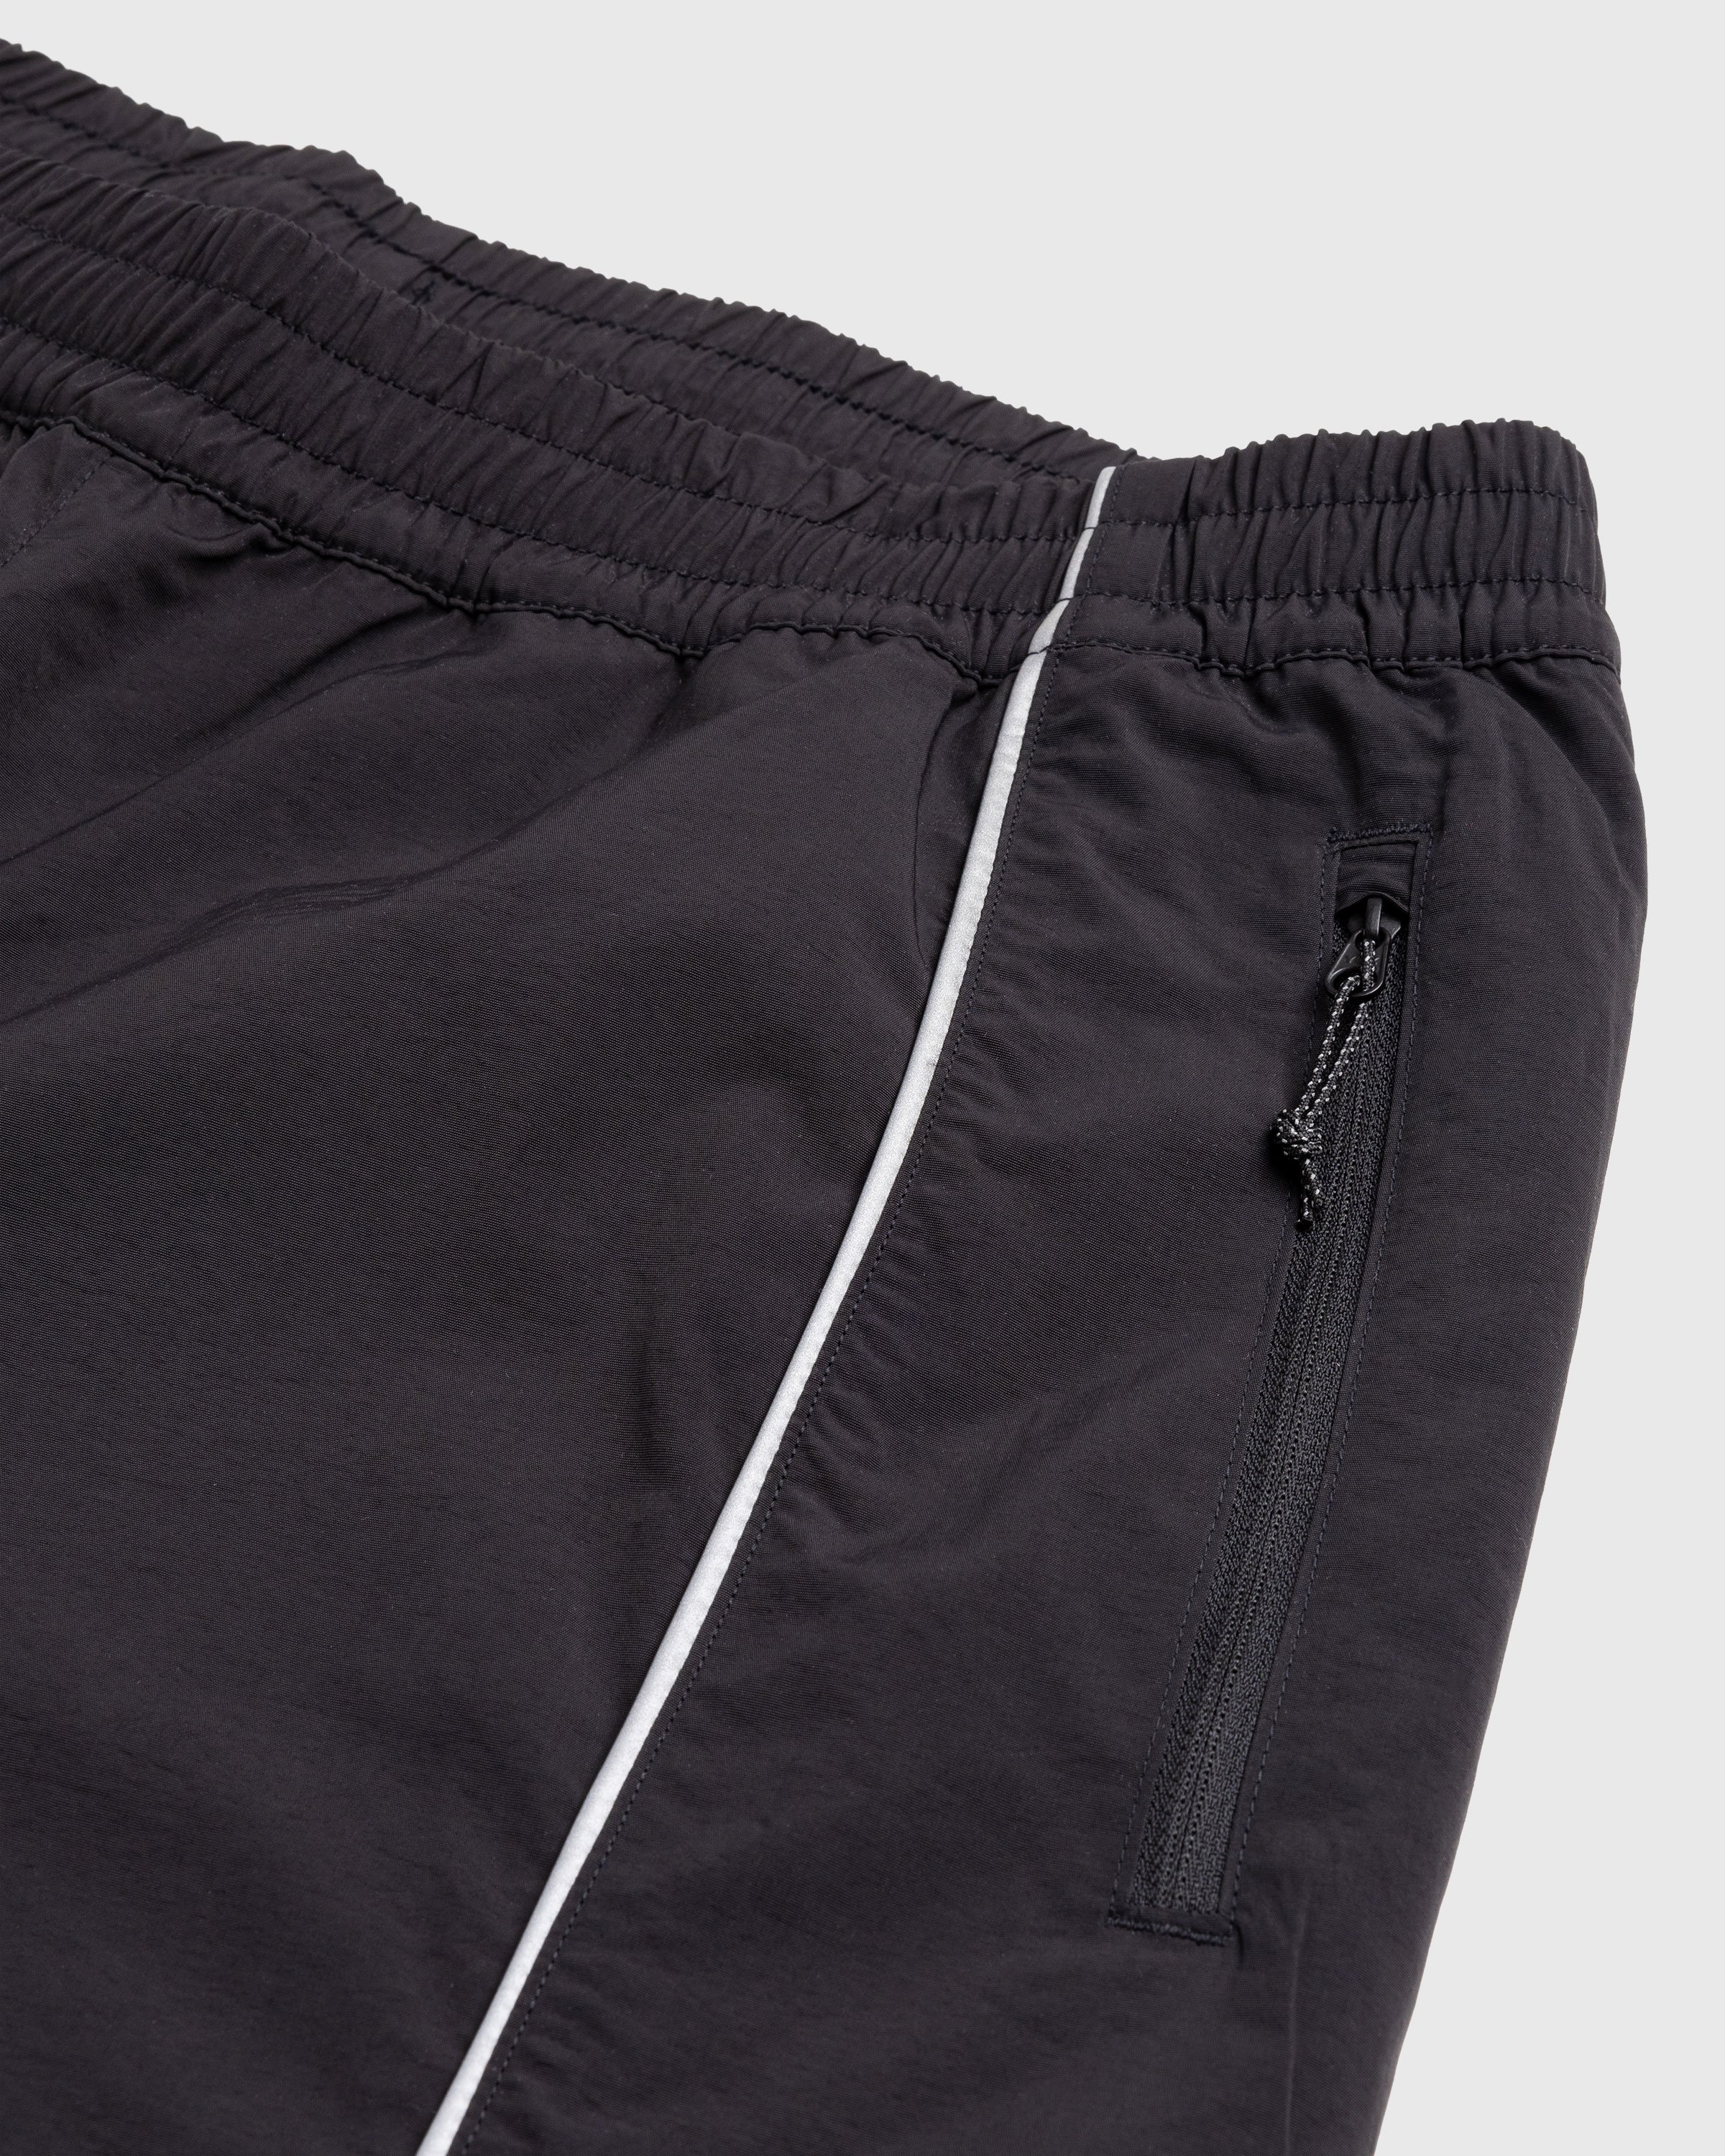 The North Face – Tek Piping Wind Pants TNF Black | Highsnobiety Shop